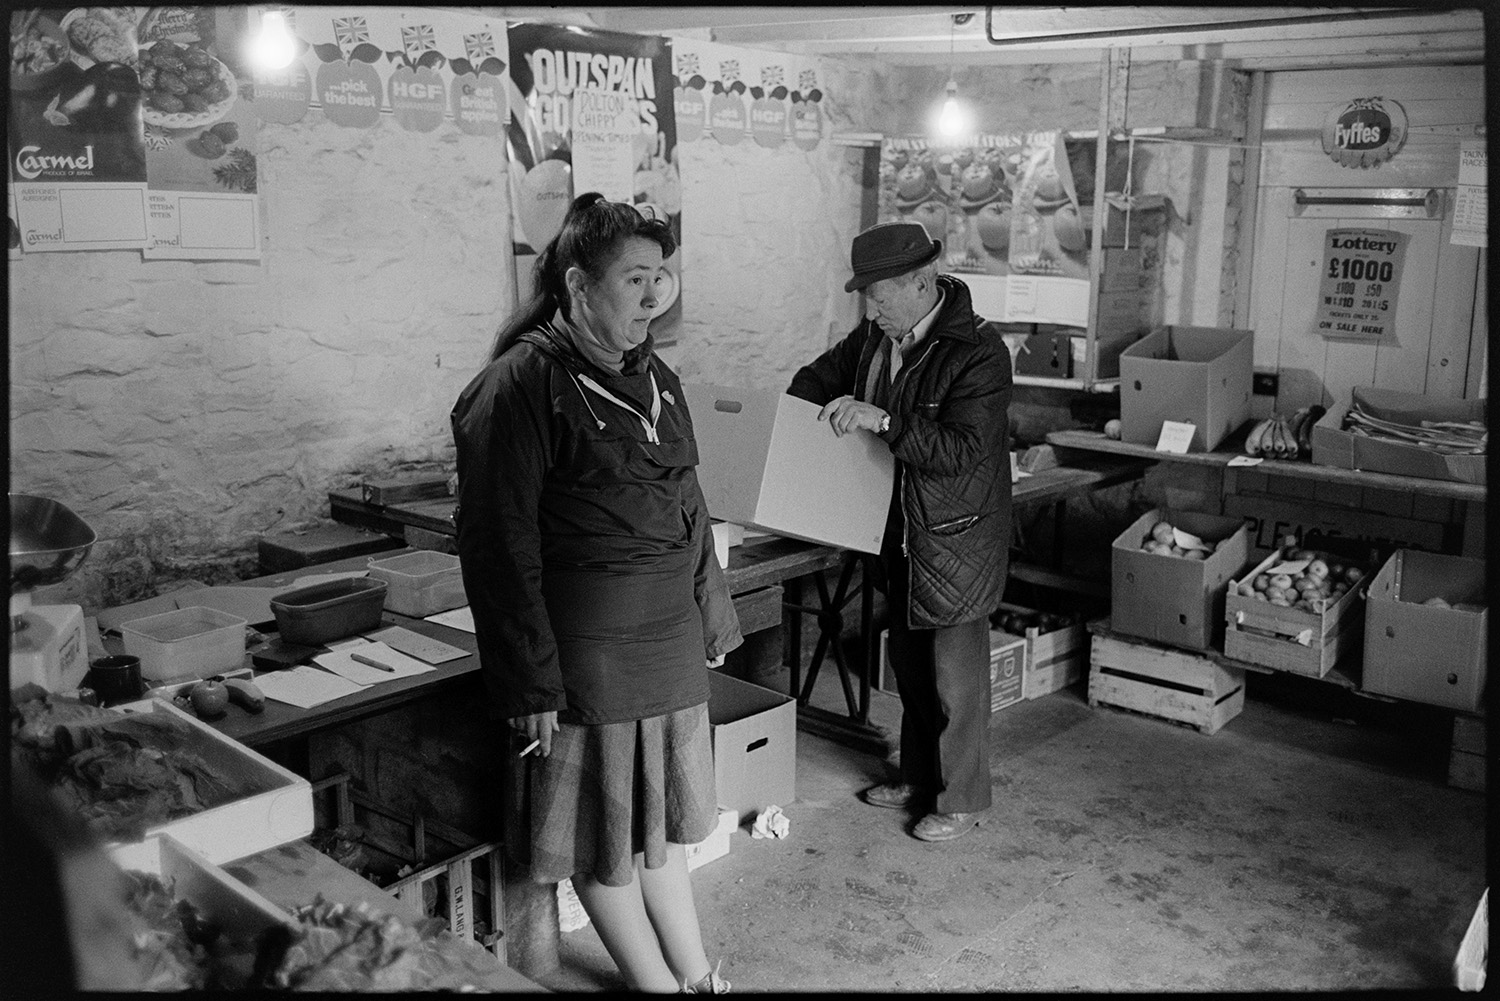 Woman serving in greengrocer's shop, waiting for customers. 
[Susan Jury running a greengrocer's shop in Dolton. She is smoking a cigarette. Various boxes of fruit and vegetables are displayed around the shop. Posters are pinned to one of the shop walls and a man is looking in one of the boxes.]